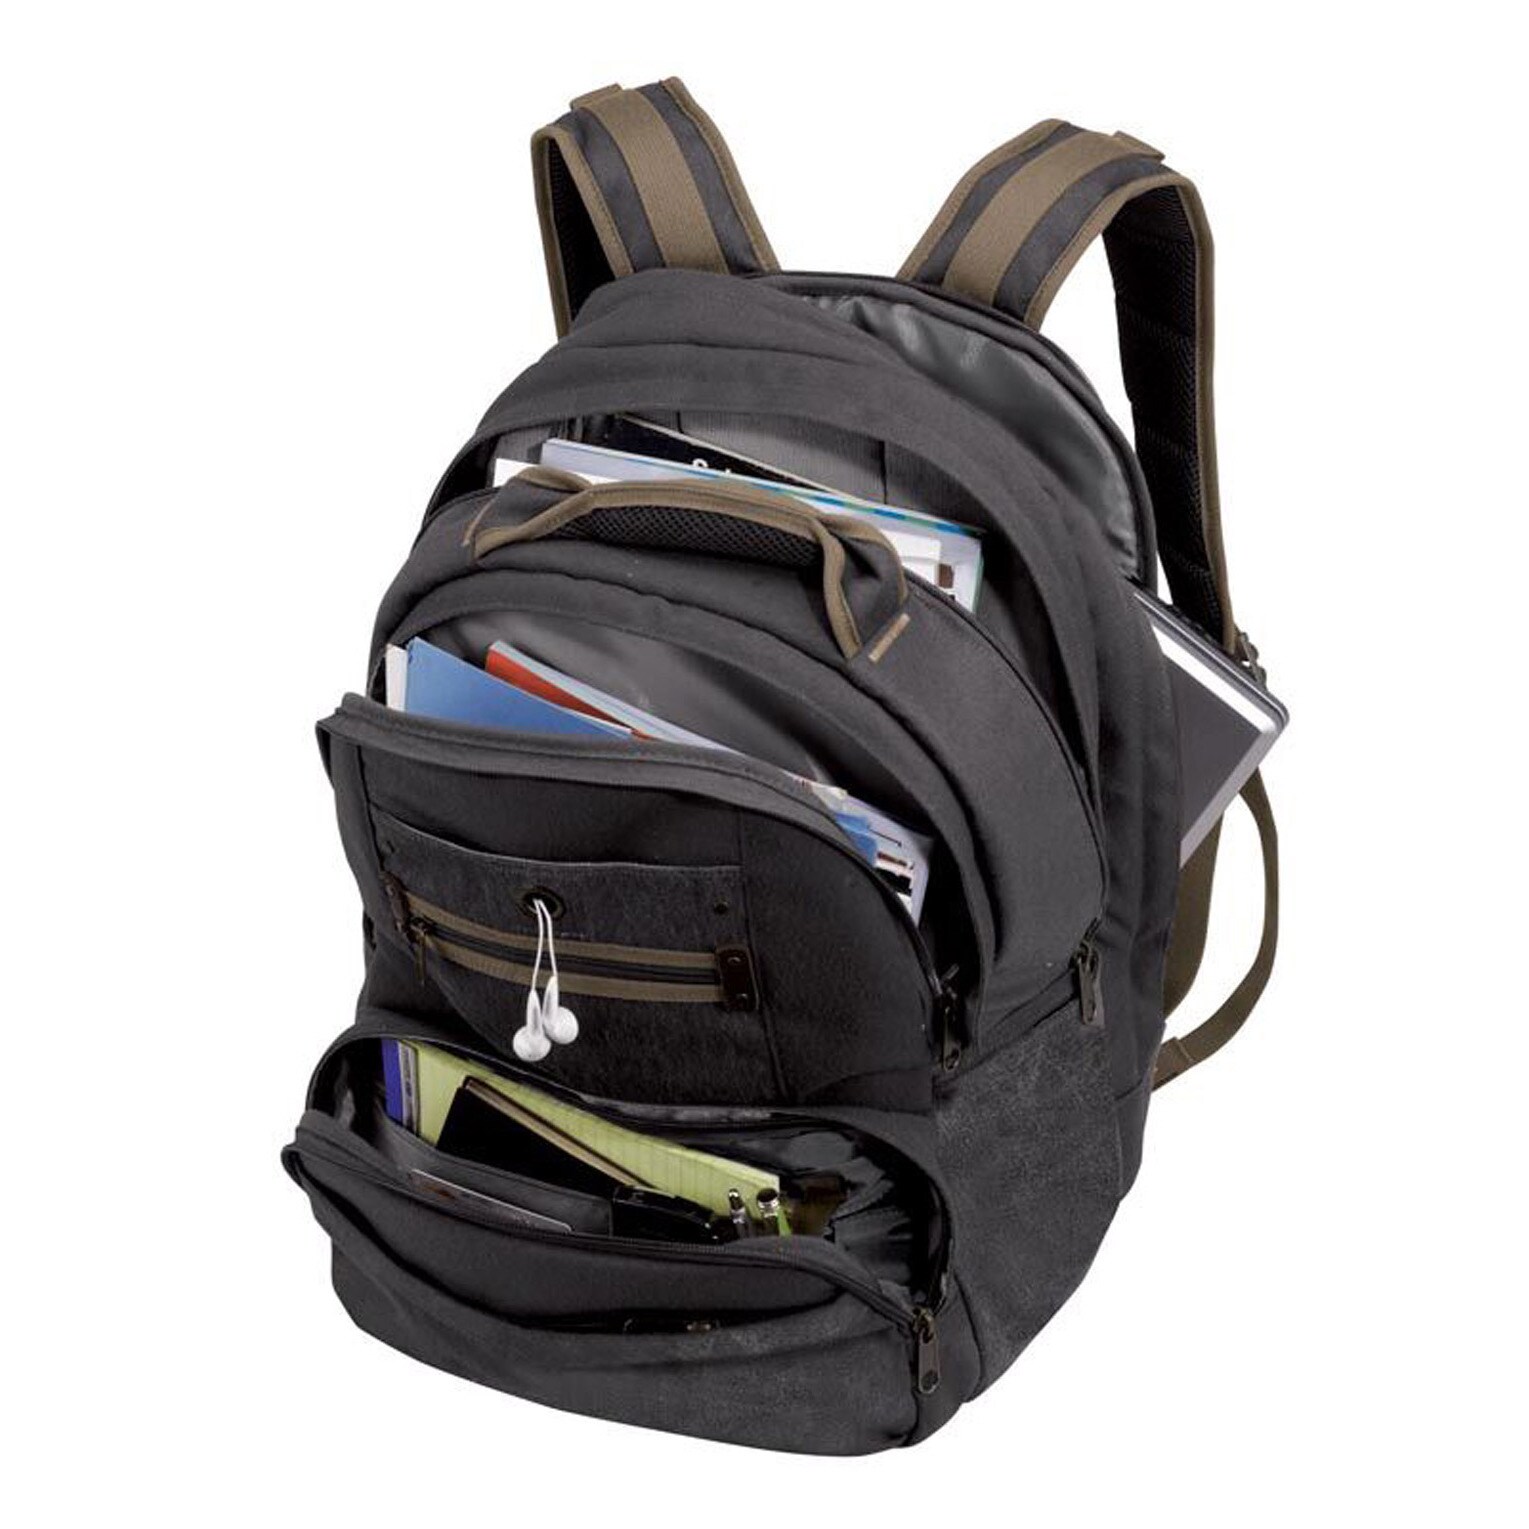 Impact Computer Backpack - image 4 of 4